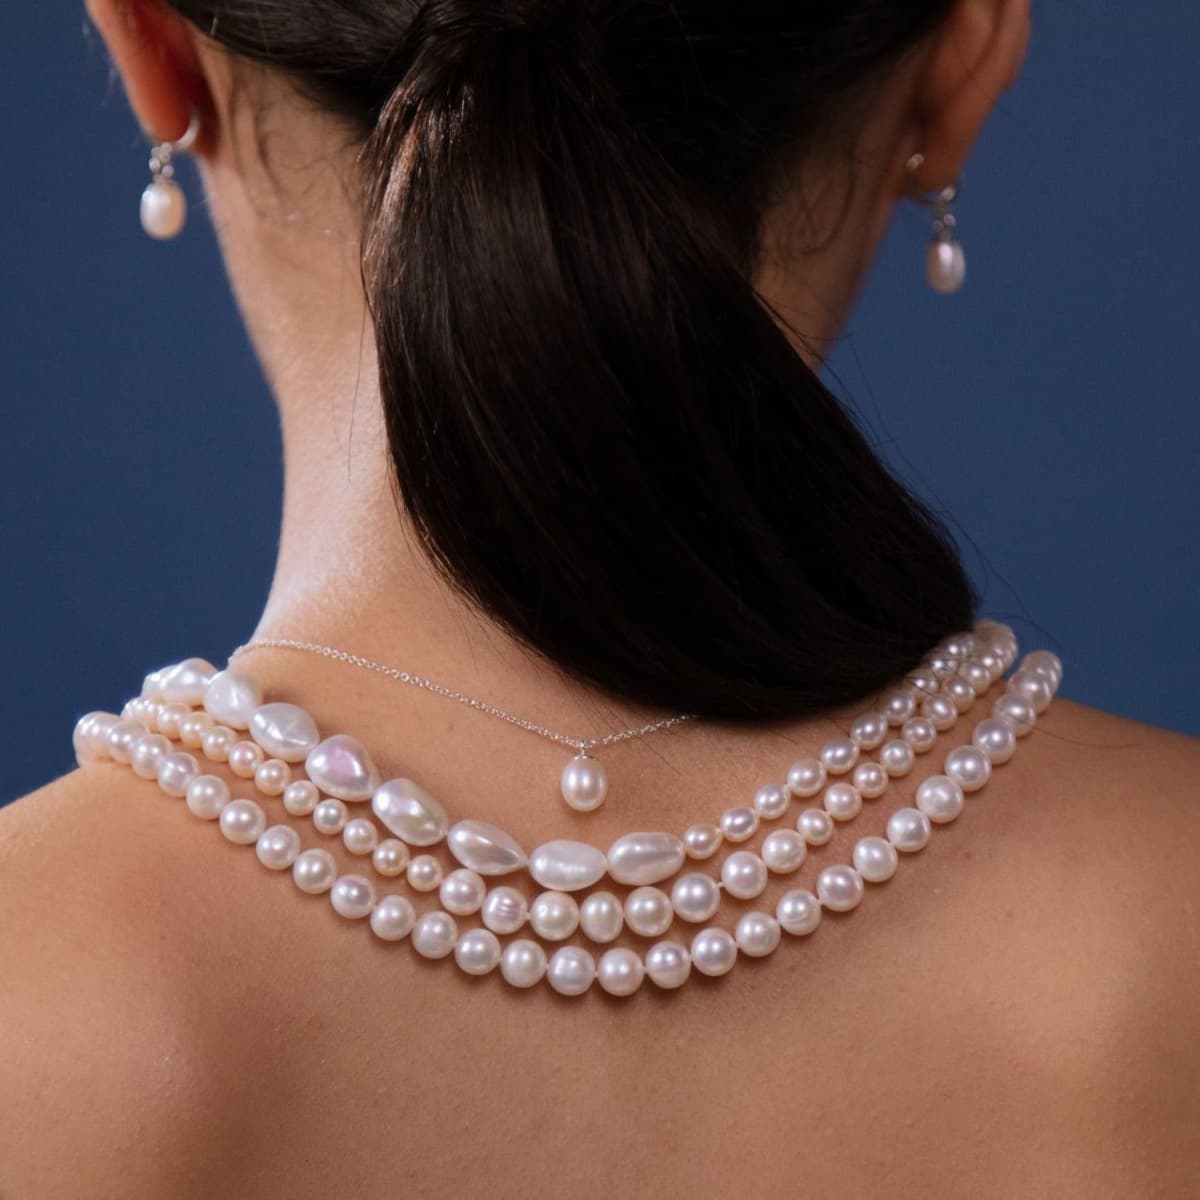 White pearls real vs fake. How to spot fake pearl necklace 